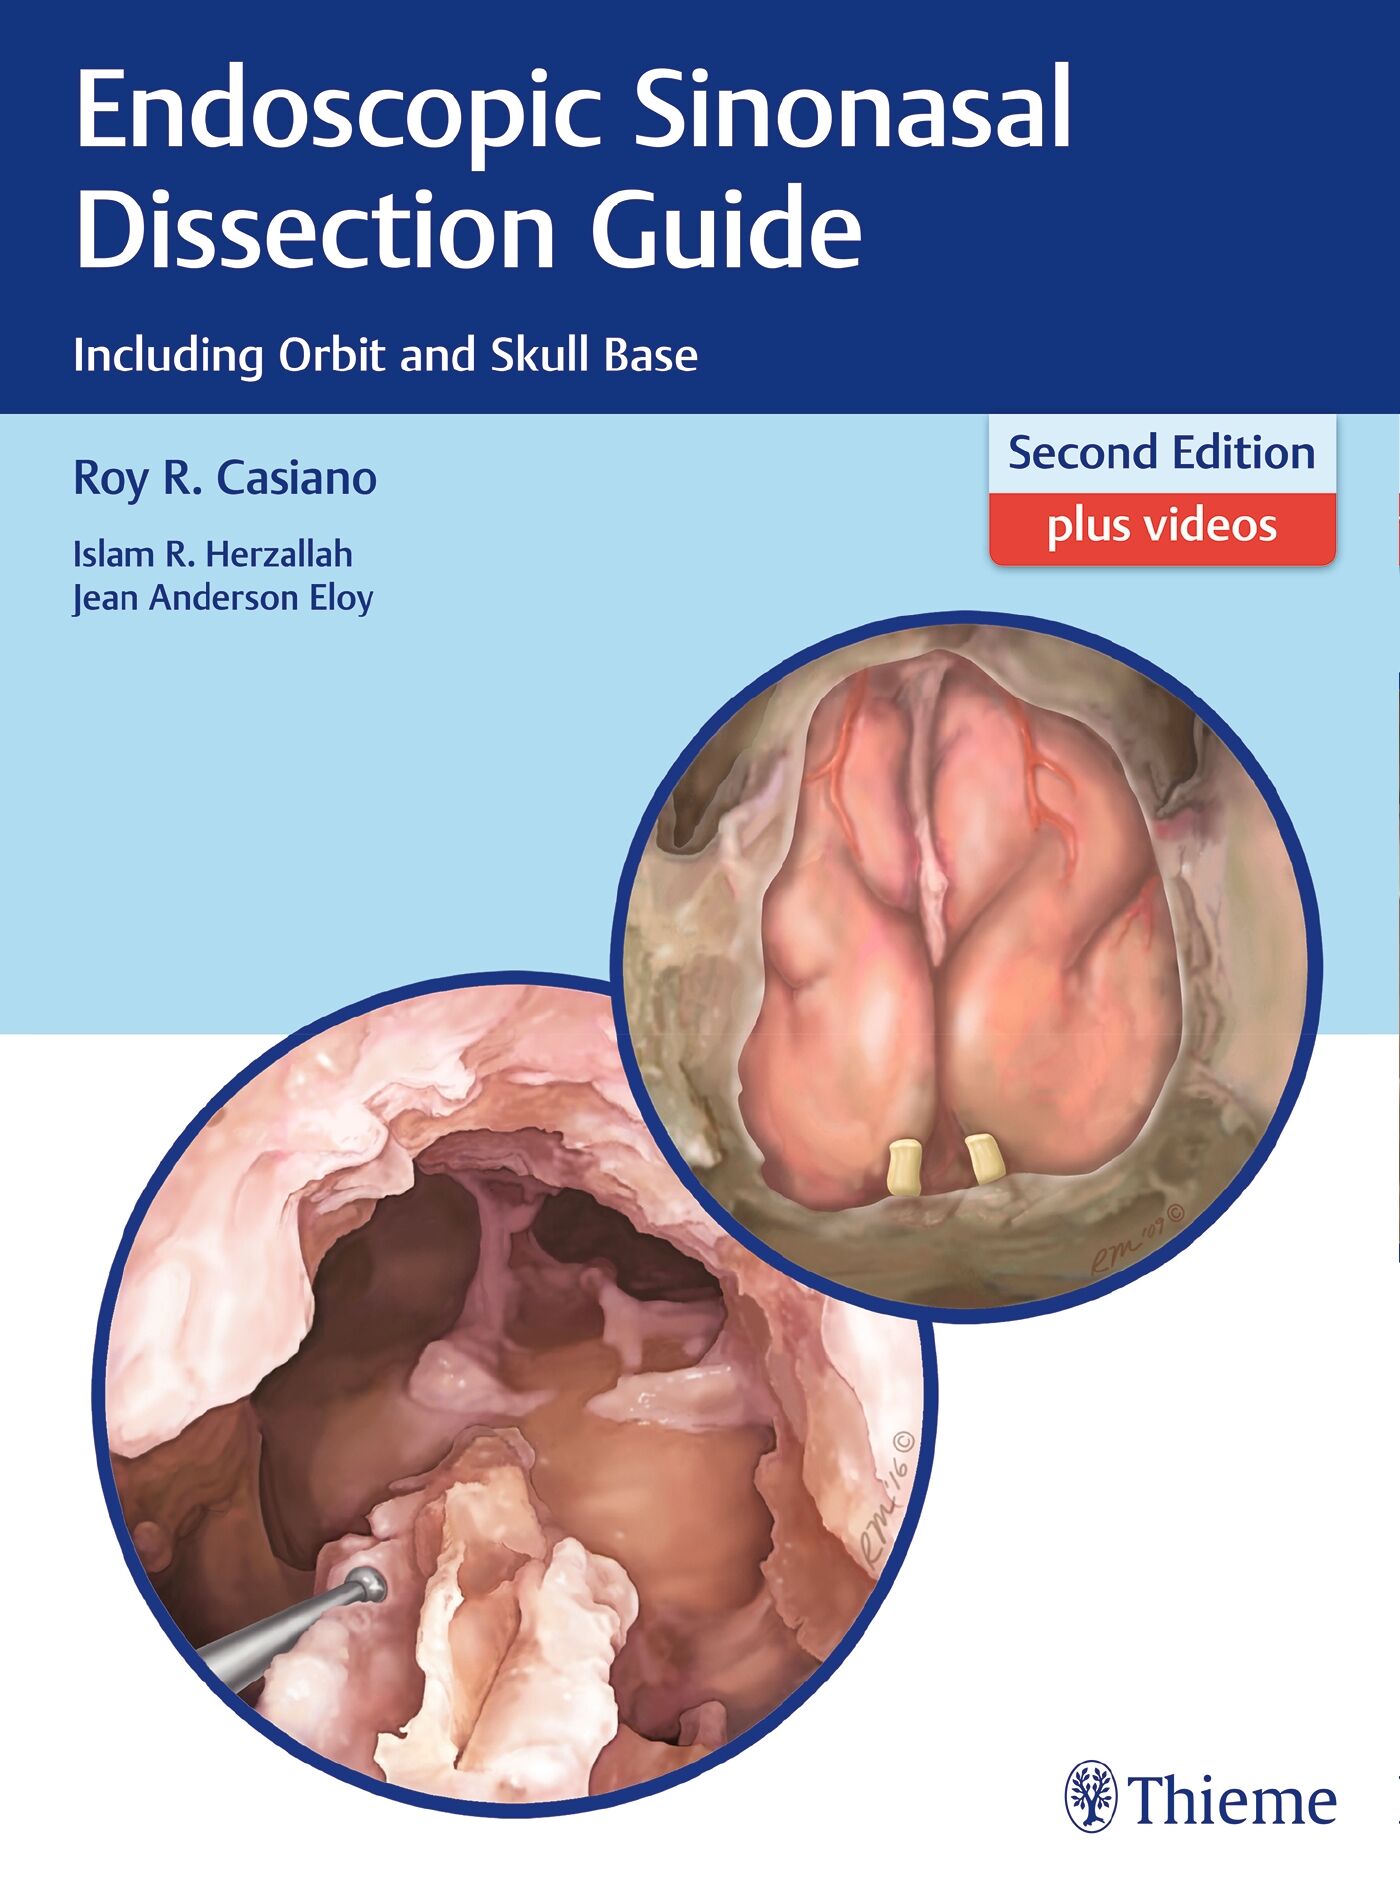 Endoscopic Sinonasal Dissection Guide, 9781626232105